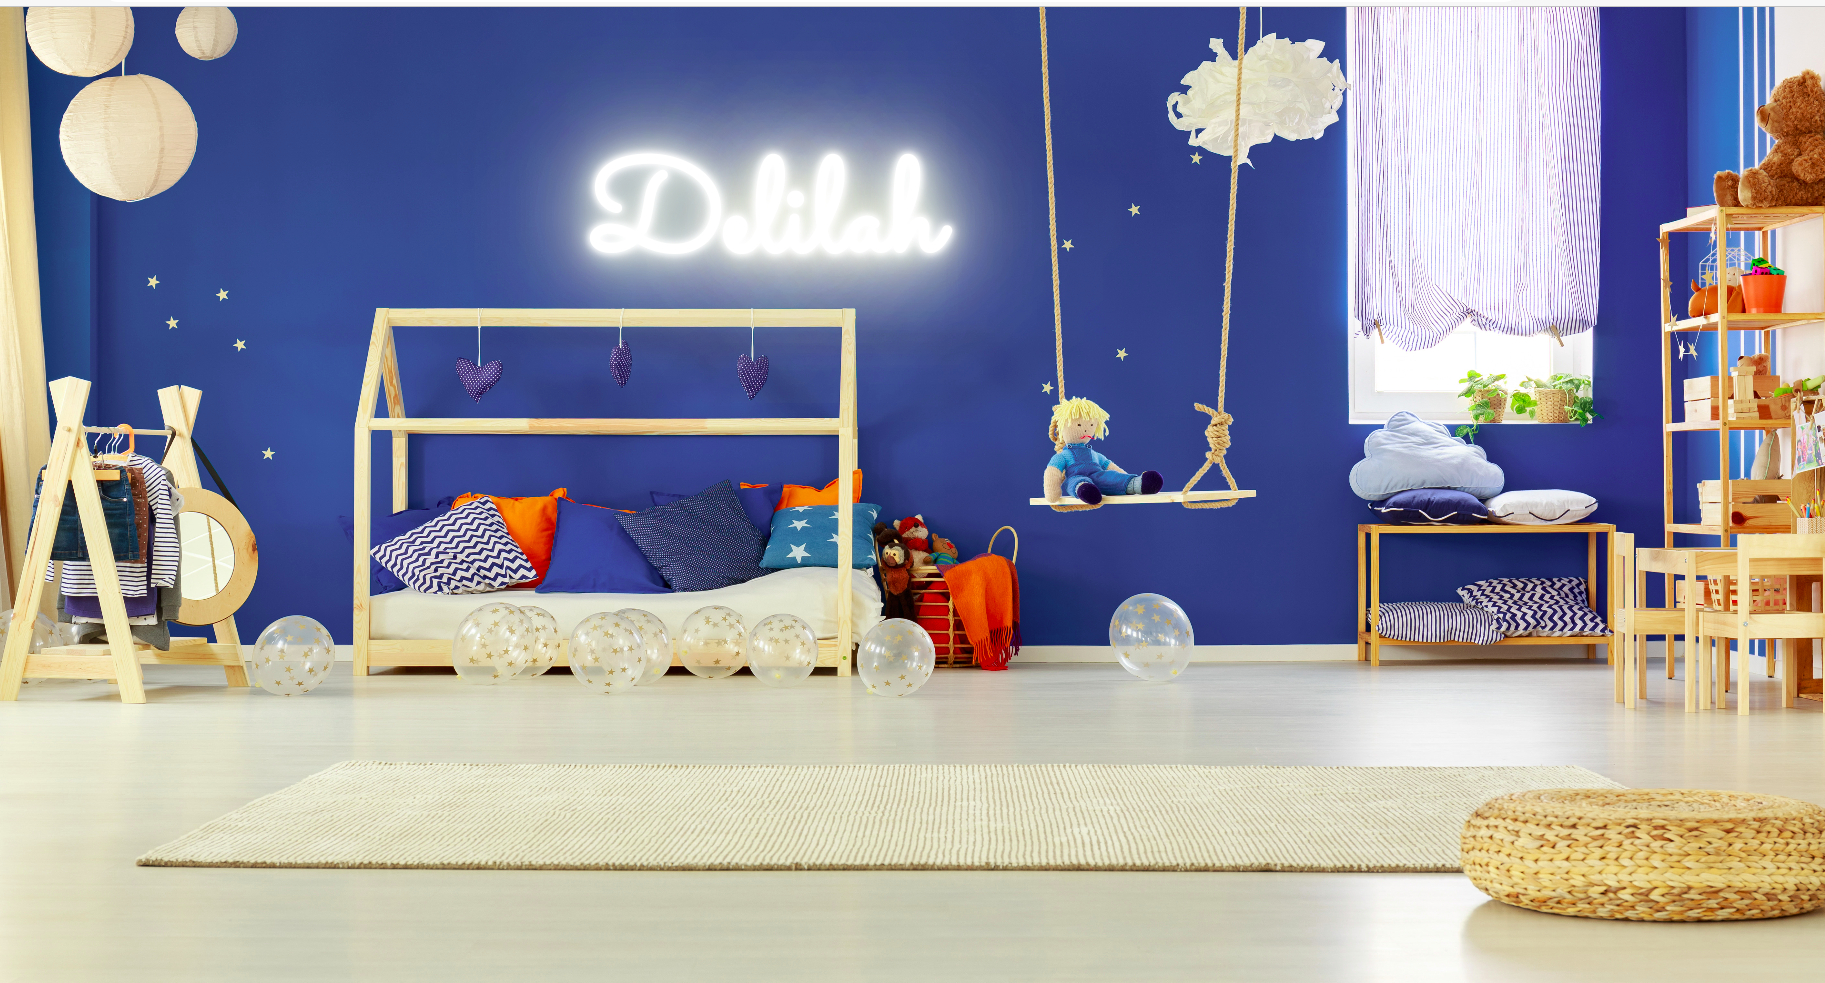 "Delilah" Baby Name LED Neon Sign